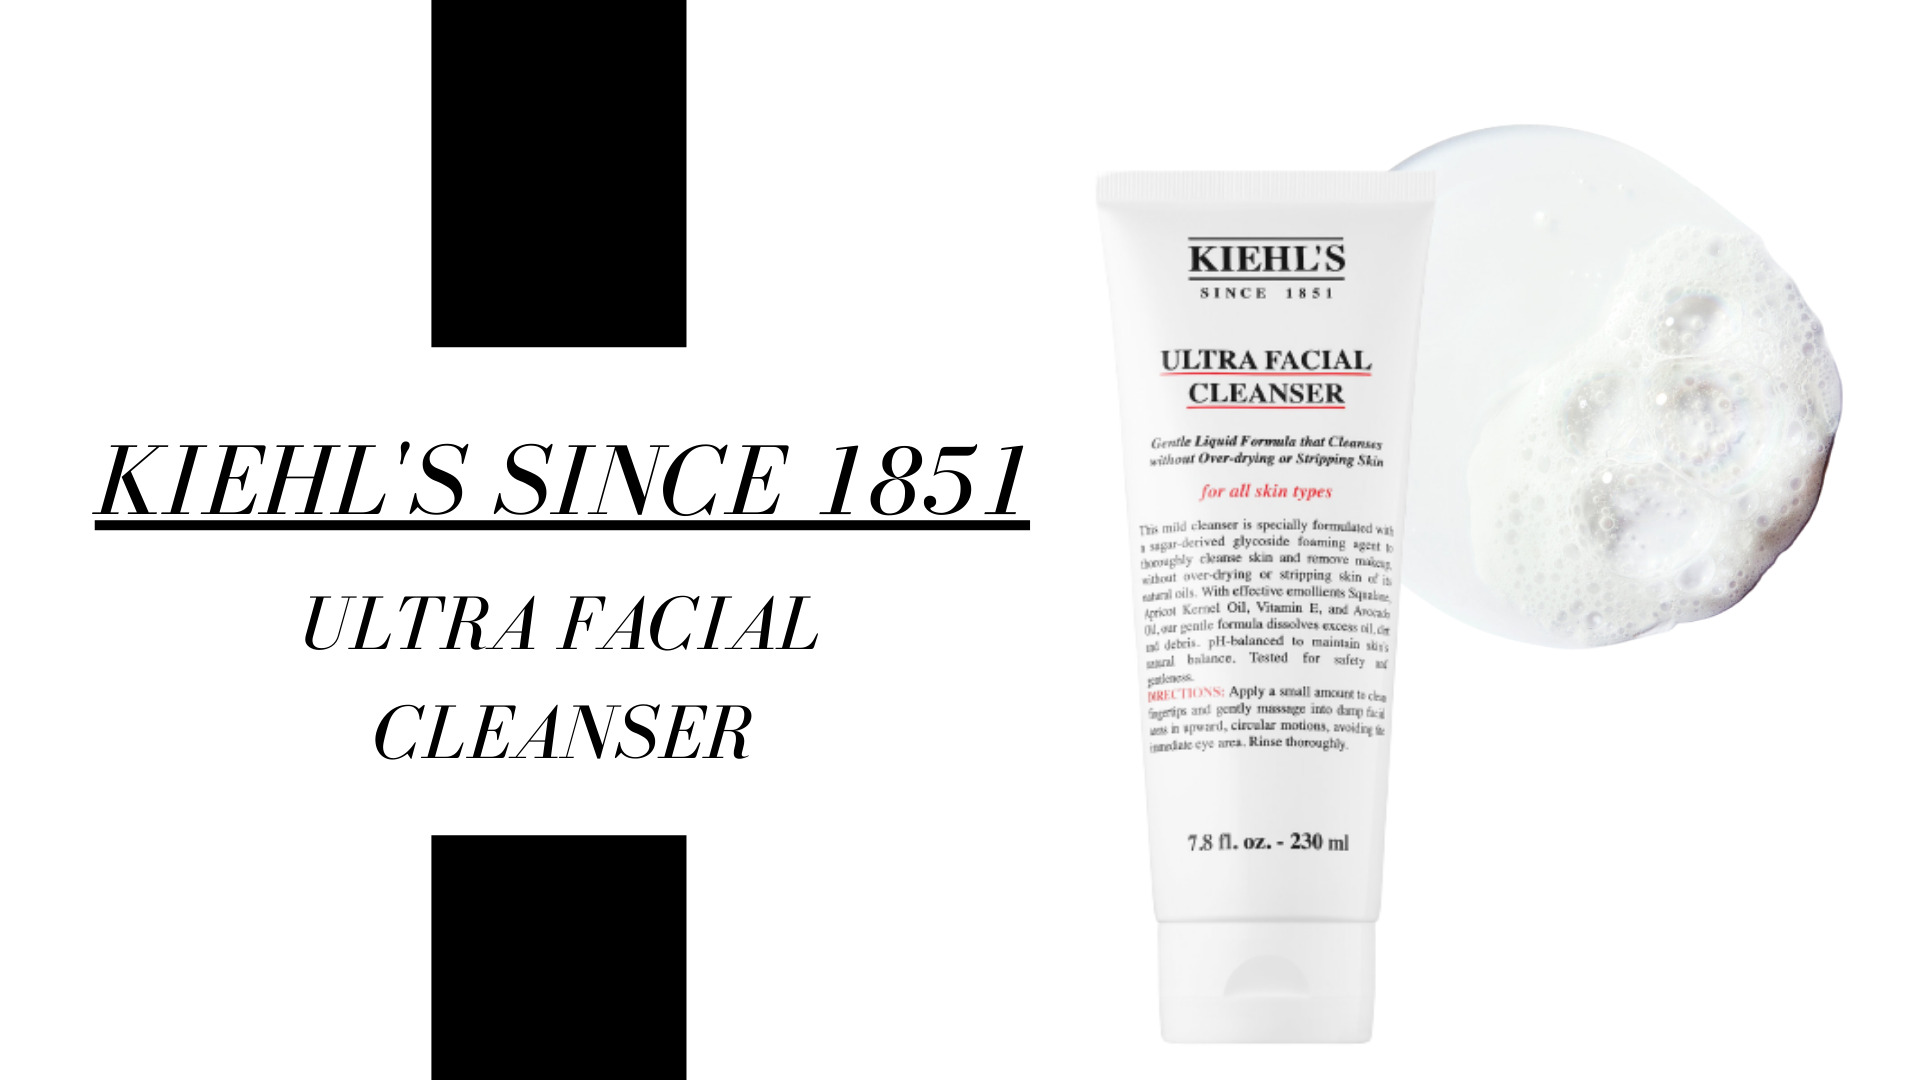 This Kiehl's cleanser is perfect. It gently washes your face by lifting away dirt and excess oil without over-drying your skin. With emollients like apricot kernel oil, avocado oil, and squalane, this liquid lightweight gel formula is fantastic for people with normal, dry, and sensitive. Definitely worth trying!